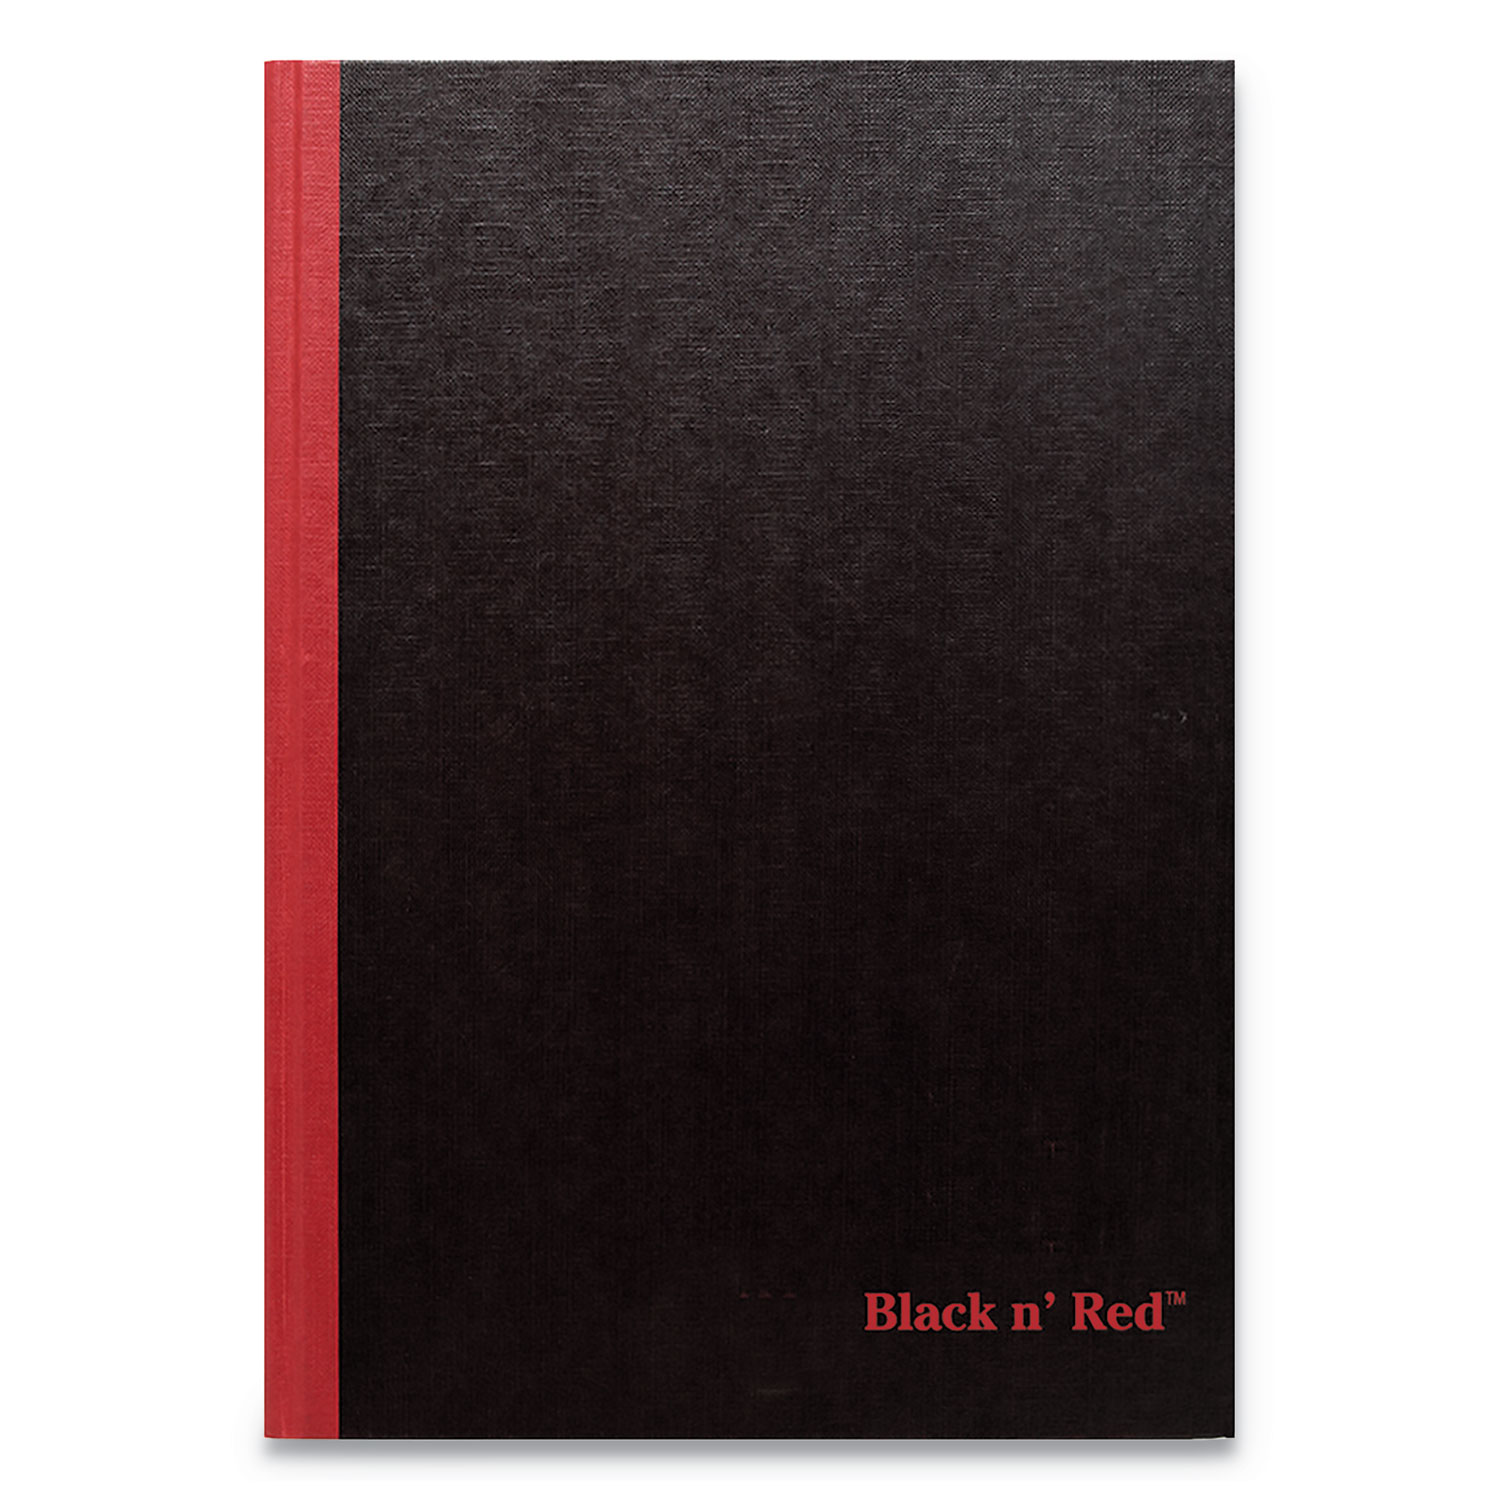  Black n' Red 400110531 Hardcover Casebound Notebooks, 1 Subject, Wide/Legal Rule, Black/Red Cover, 9.88 x 7, 96 Sheets (JDK400110531) 